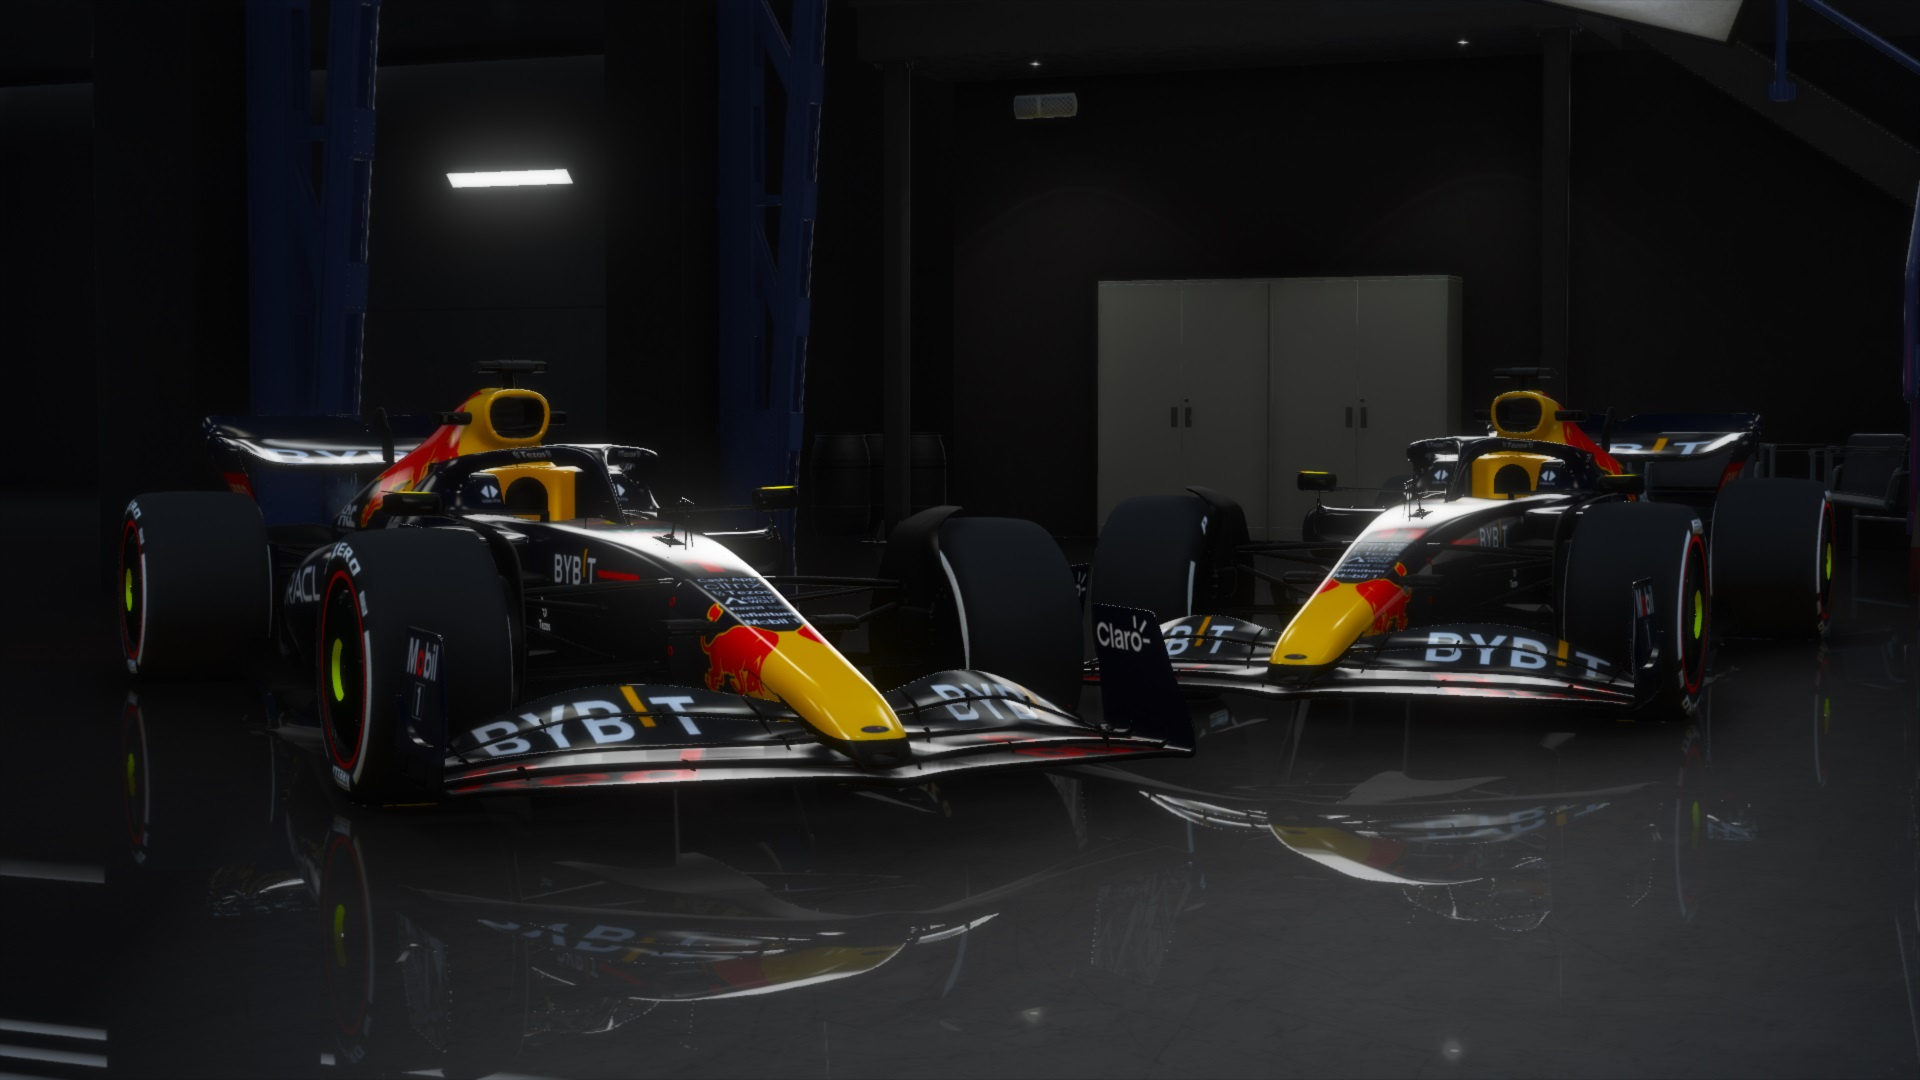 Add 18. RB 18 Red bull 2022. F1 Red bull Racing rb18. Red bull rb18b Silverstone. Red bull f1 2022 car.